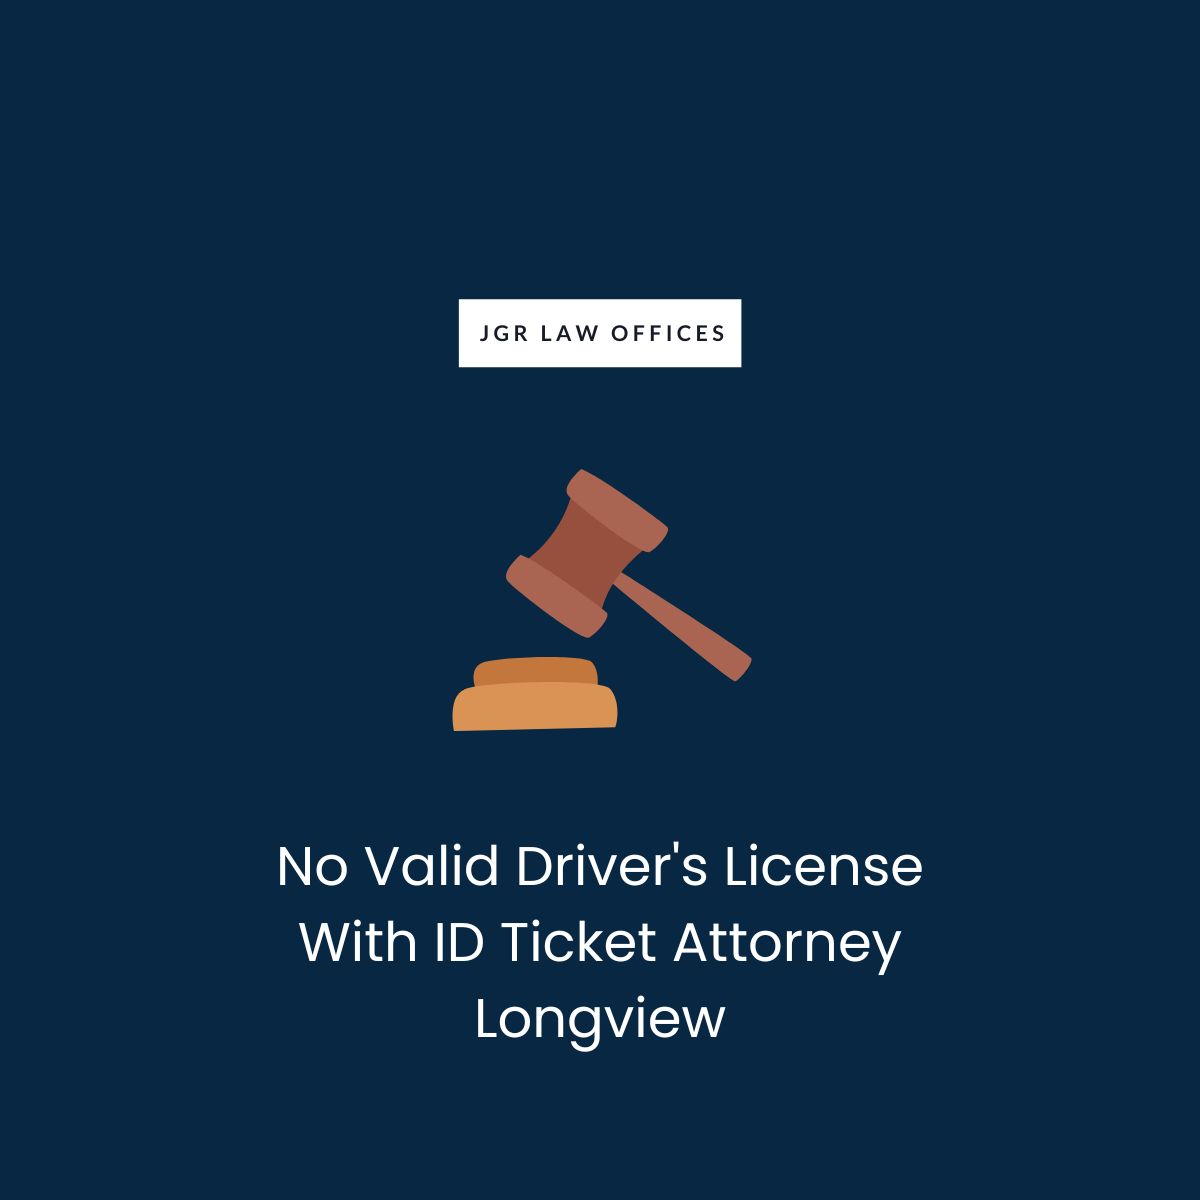 No Valid Driver's License With ID Ticket Attorney Longview